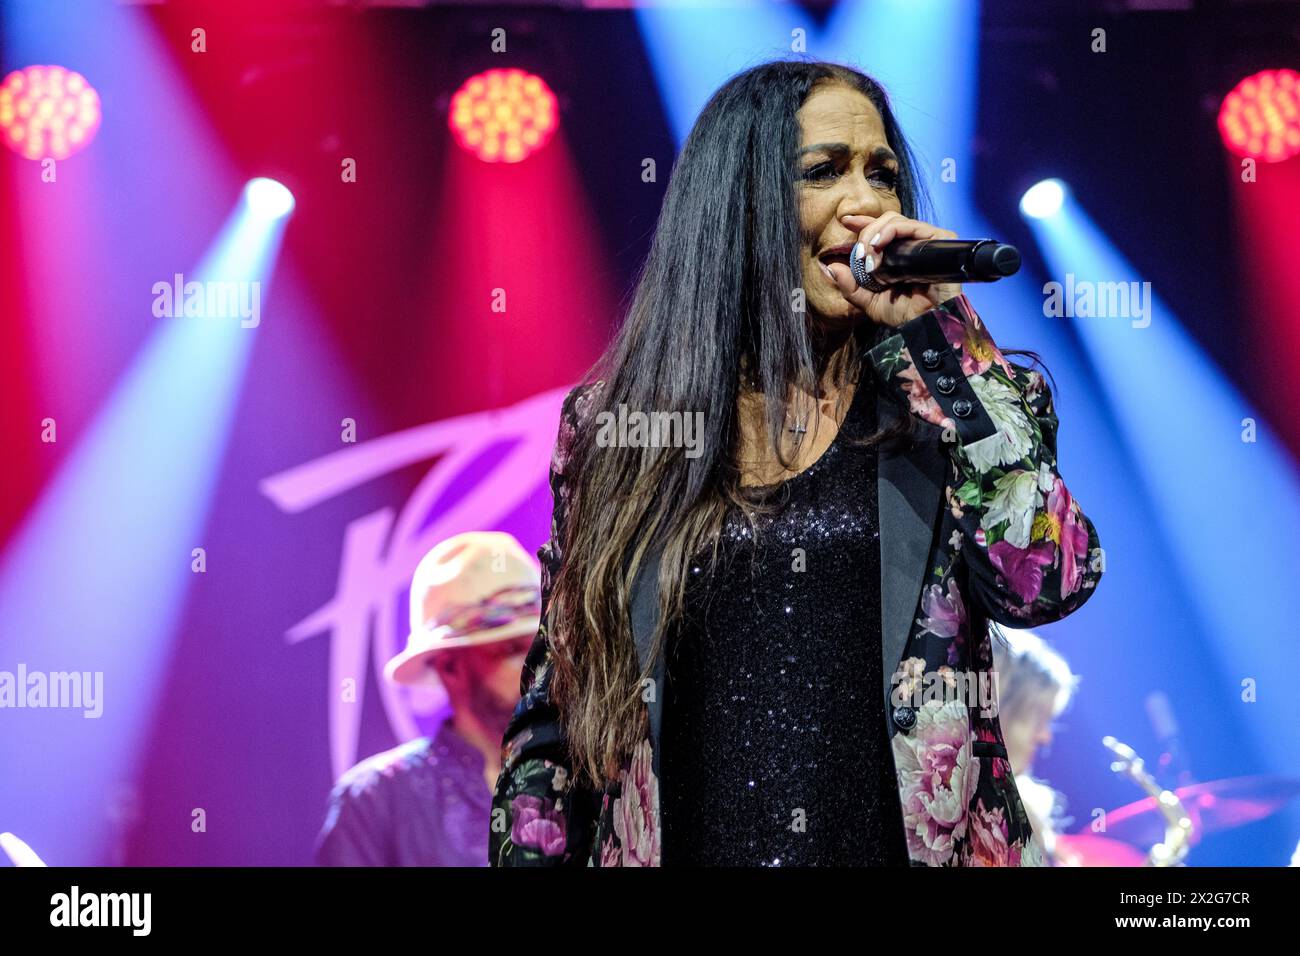 Bern, Switzerland. 19th, March 2024. The tribute band The Purple Jam performs a live concert at Bierhübeli in Bern. The band consists of former Prince band members and pays tribute to Prince’s music legacy. Here musician and singer Sheila E. is seen live on stage. (Photo credit: Gonzales Photo - Tilman Jentzsch). Stock Photo